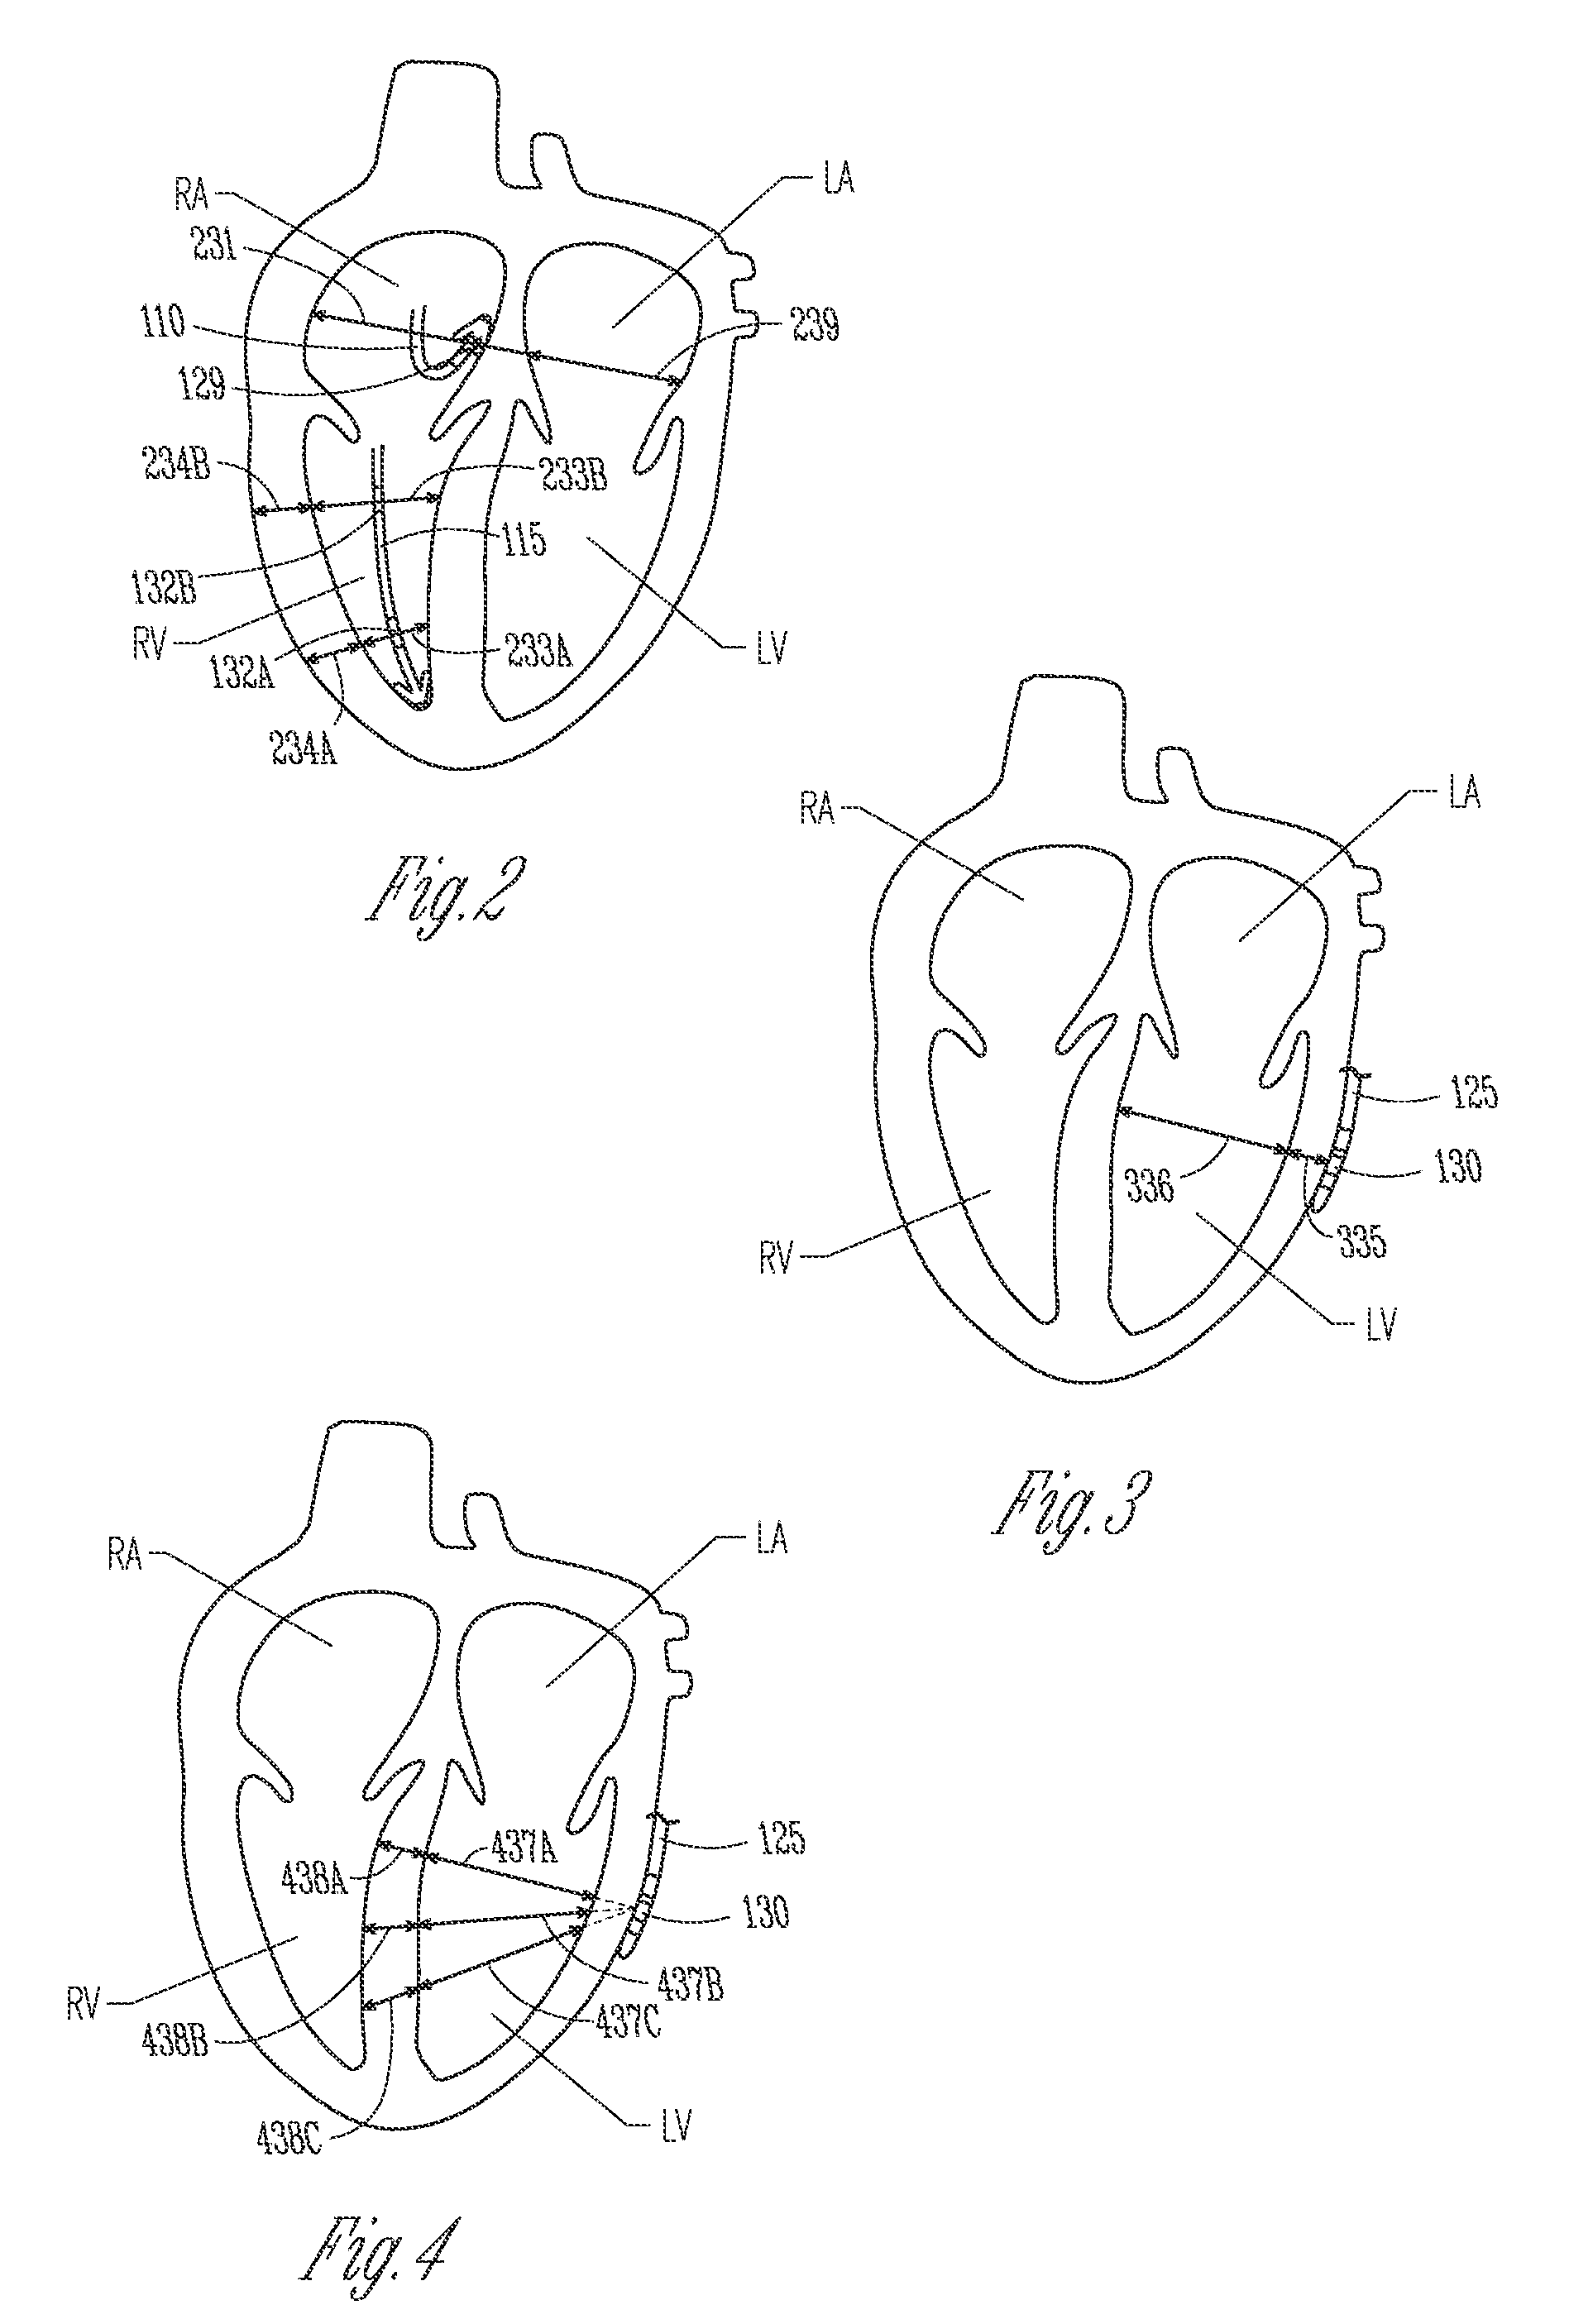 Method and apparatus for controlling cardiac therapy using ultrasound transducer